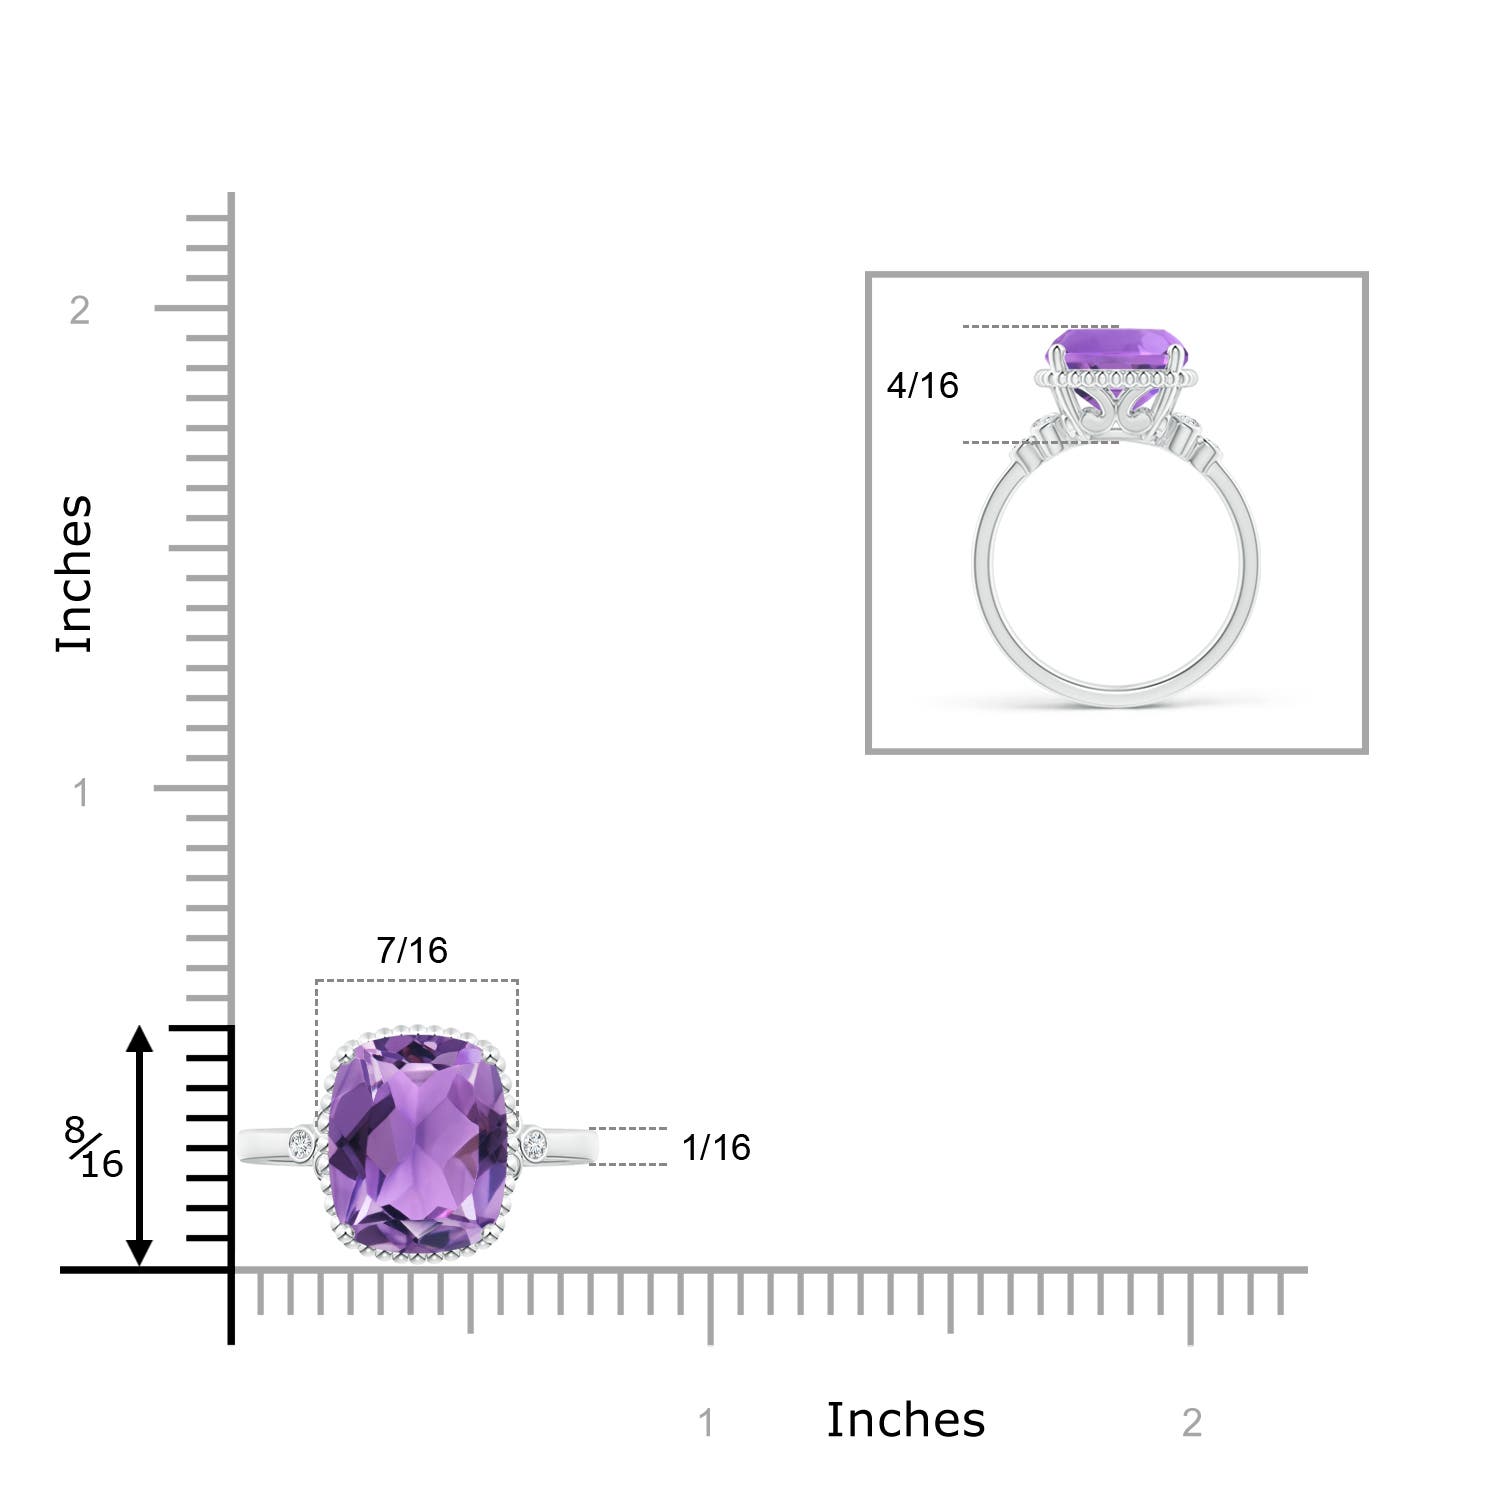 AA - Amethyst / 3.58 CT / 14 KT White Gold